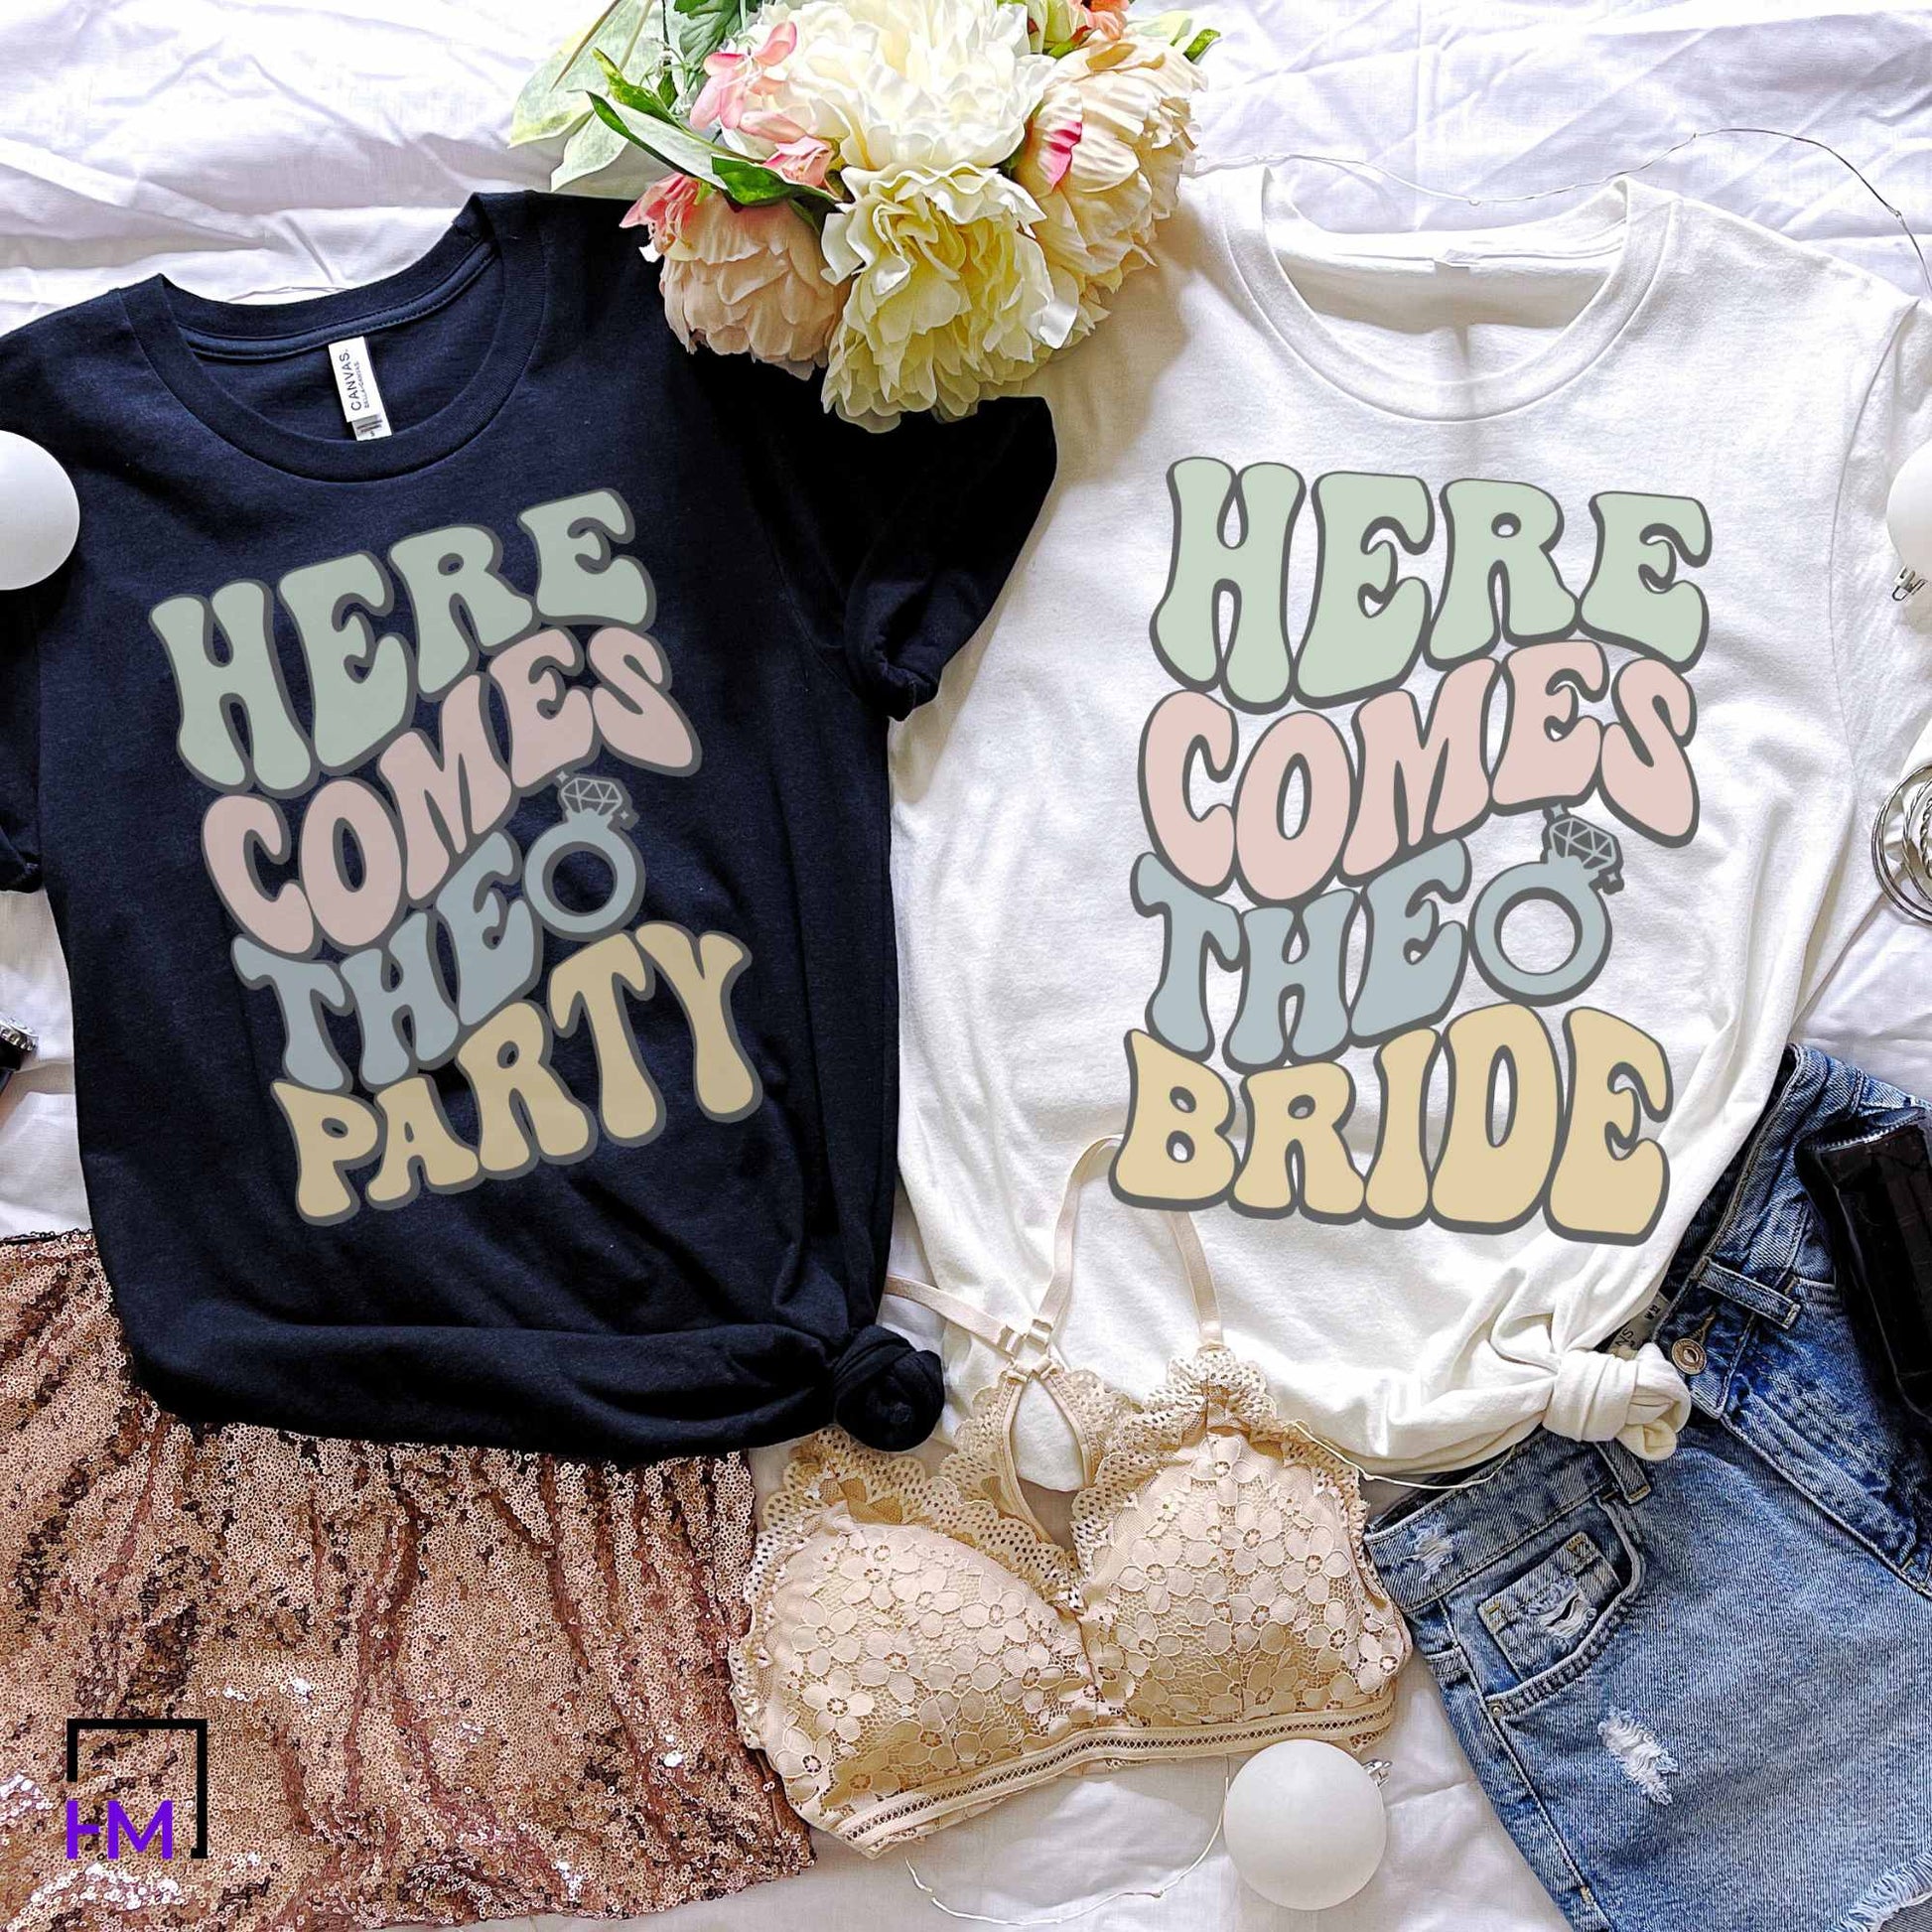 Here Comes the Bride, Here Comes the Party Shirts, Funny Bachelorette Party Shirts HMDesignStudioUS